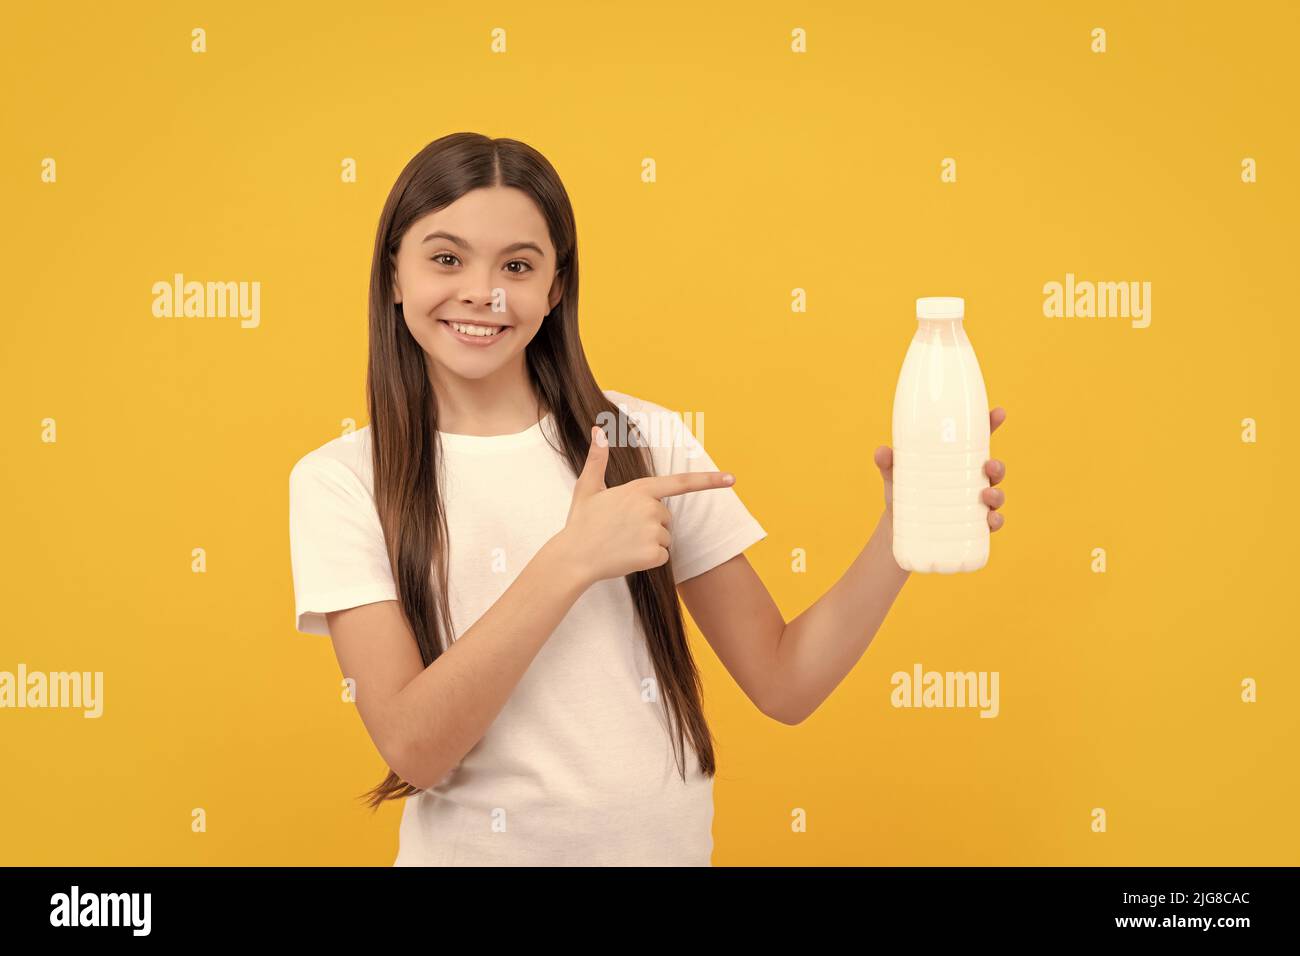 happy child pointing finger on dairy beverage product. teen girl going to drink milk. Stock Photo